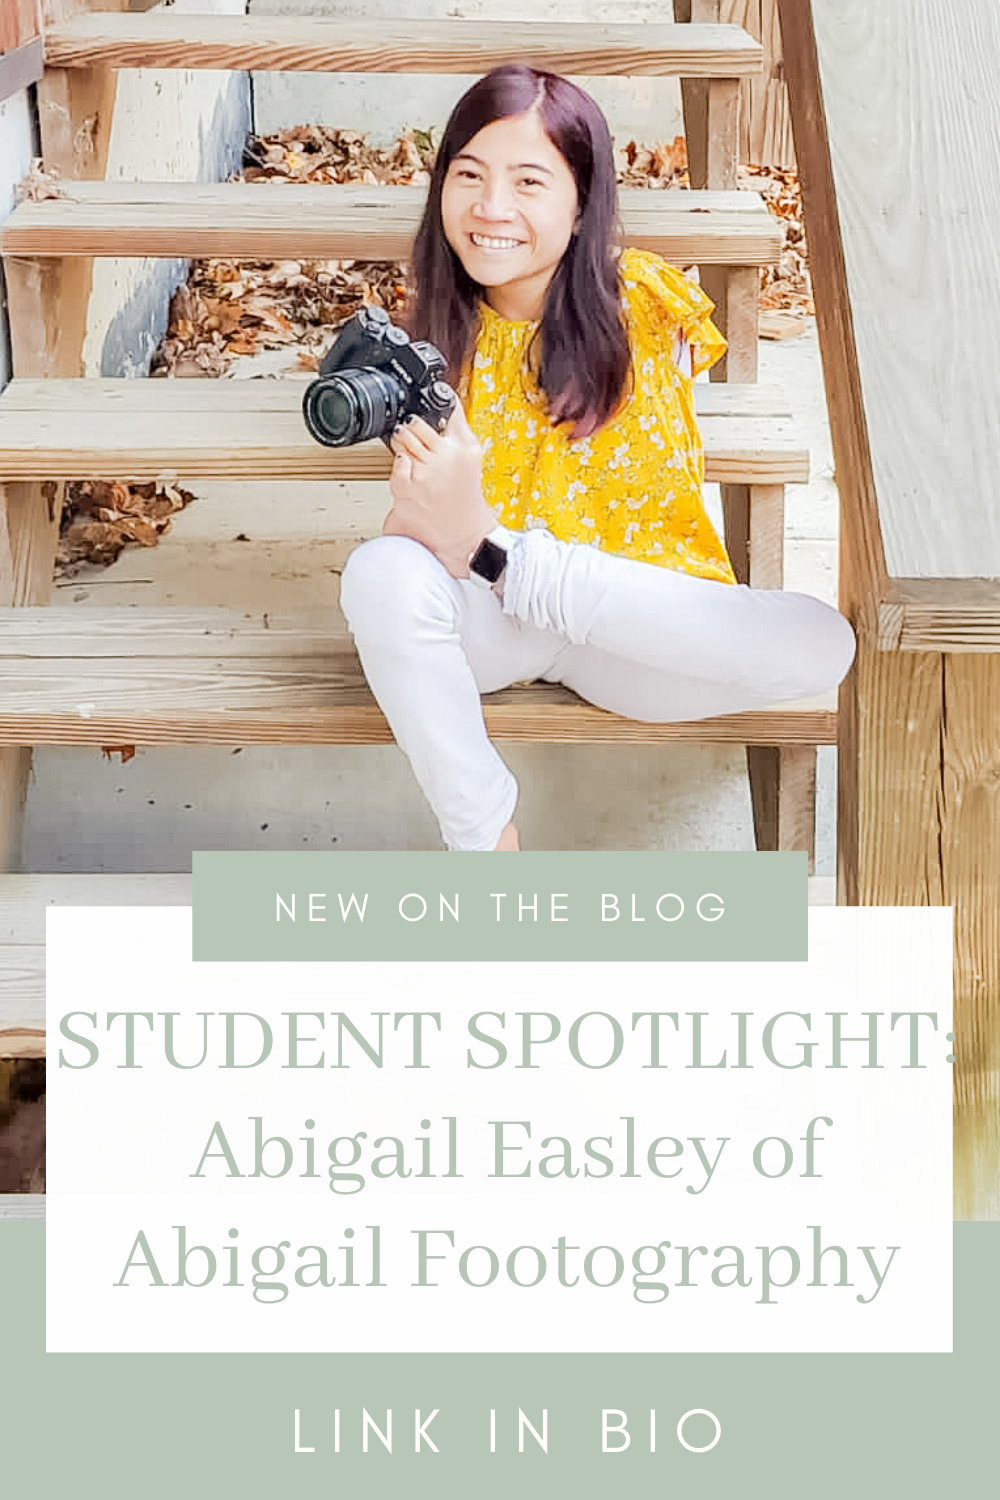 Abigail Easley shares her business journey as the owner of Abigail Footography